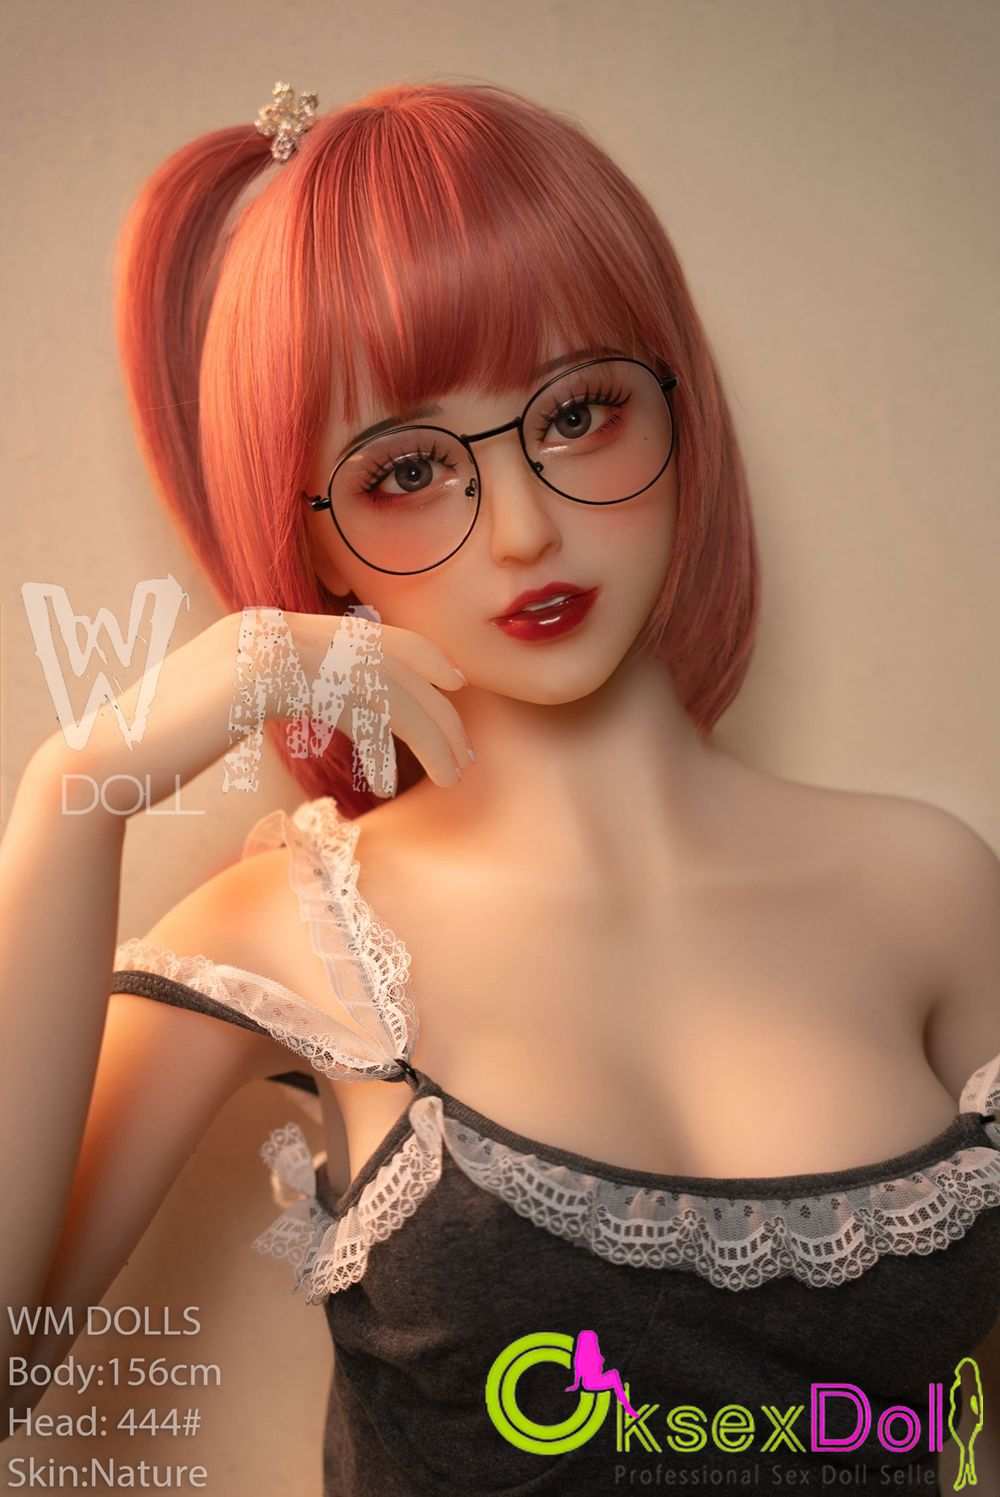 New Sex Dolls Pictures of 『Kimberly』